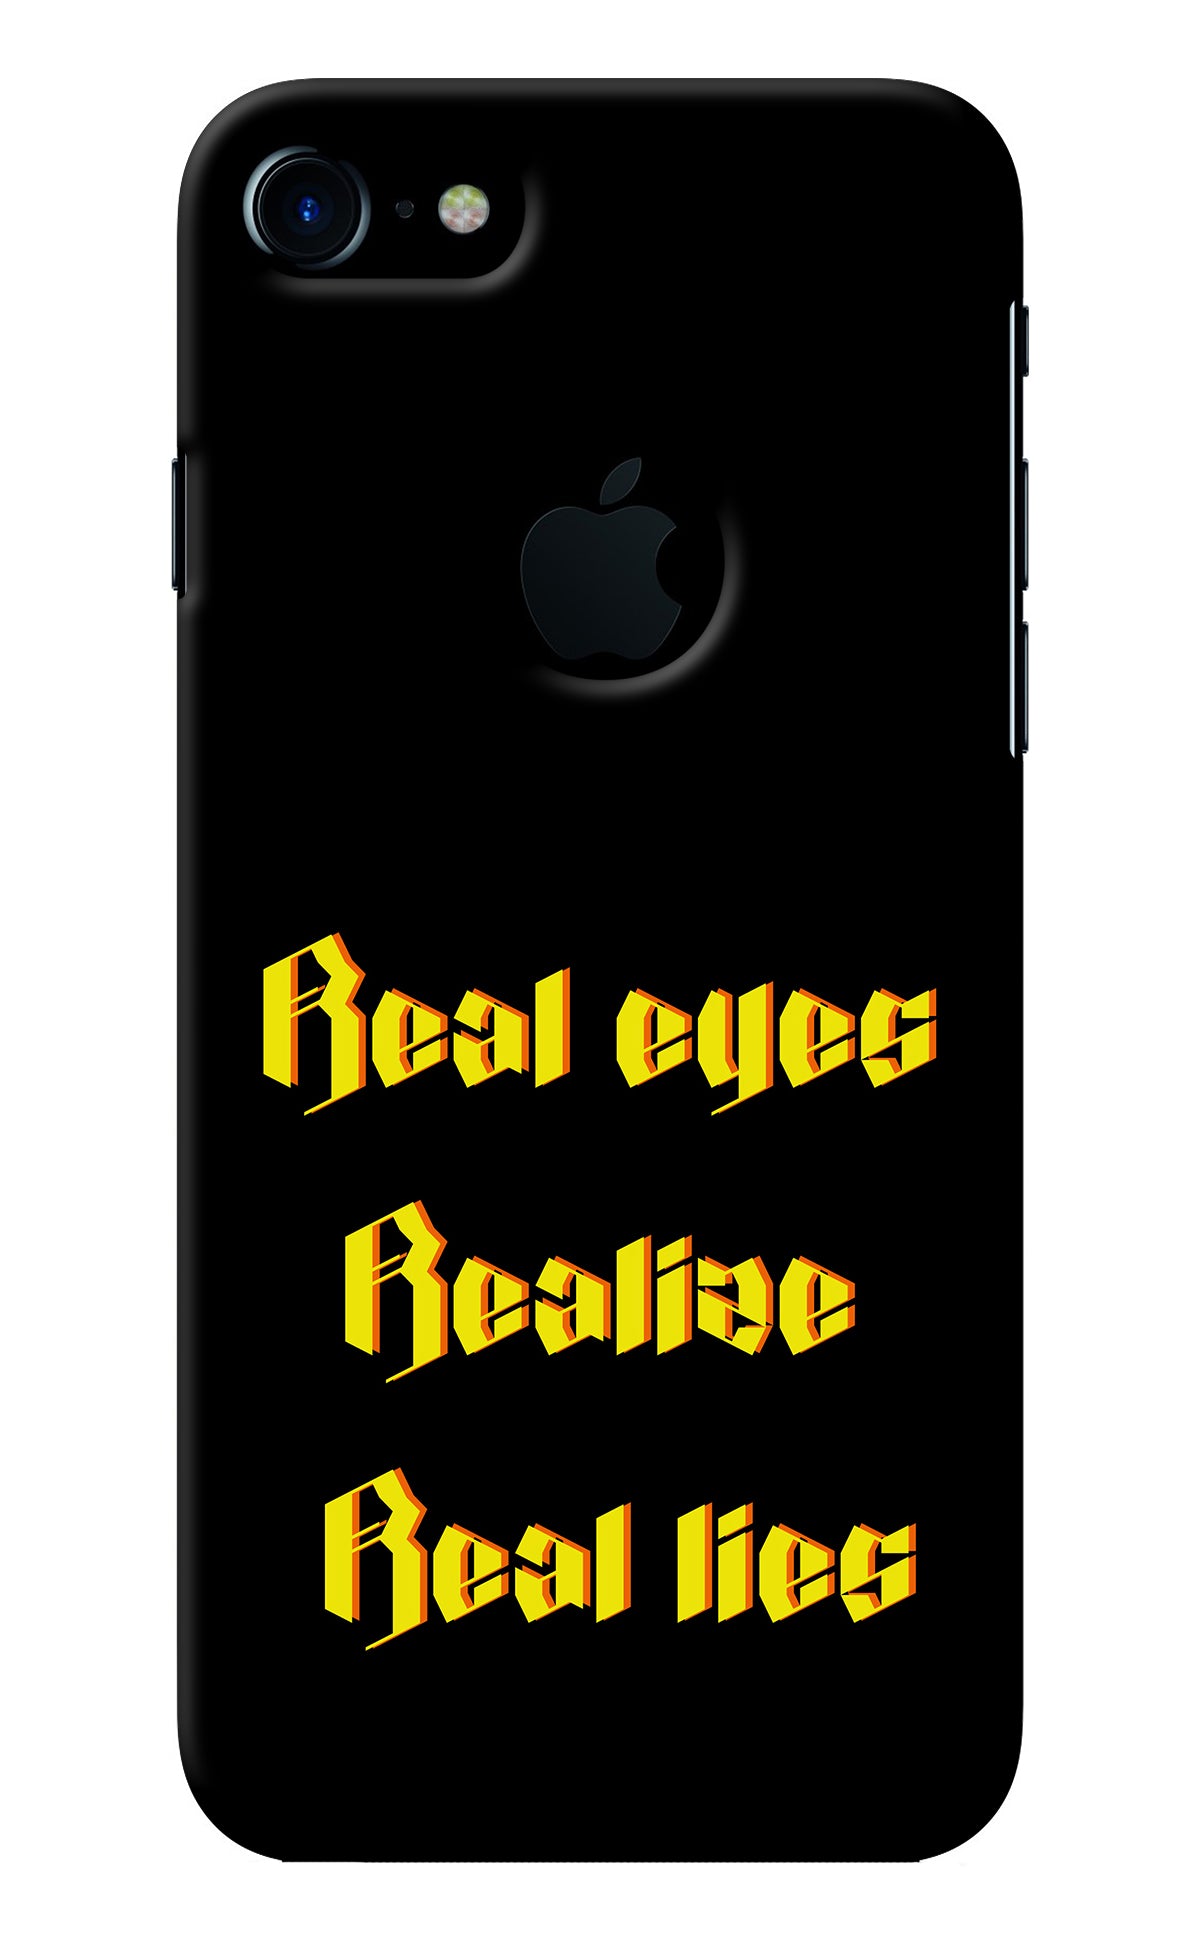 Real Eyes Realize Real Lies iPhone 7 Logocut Back Cover